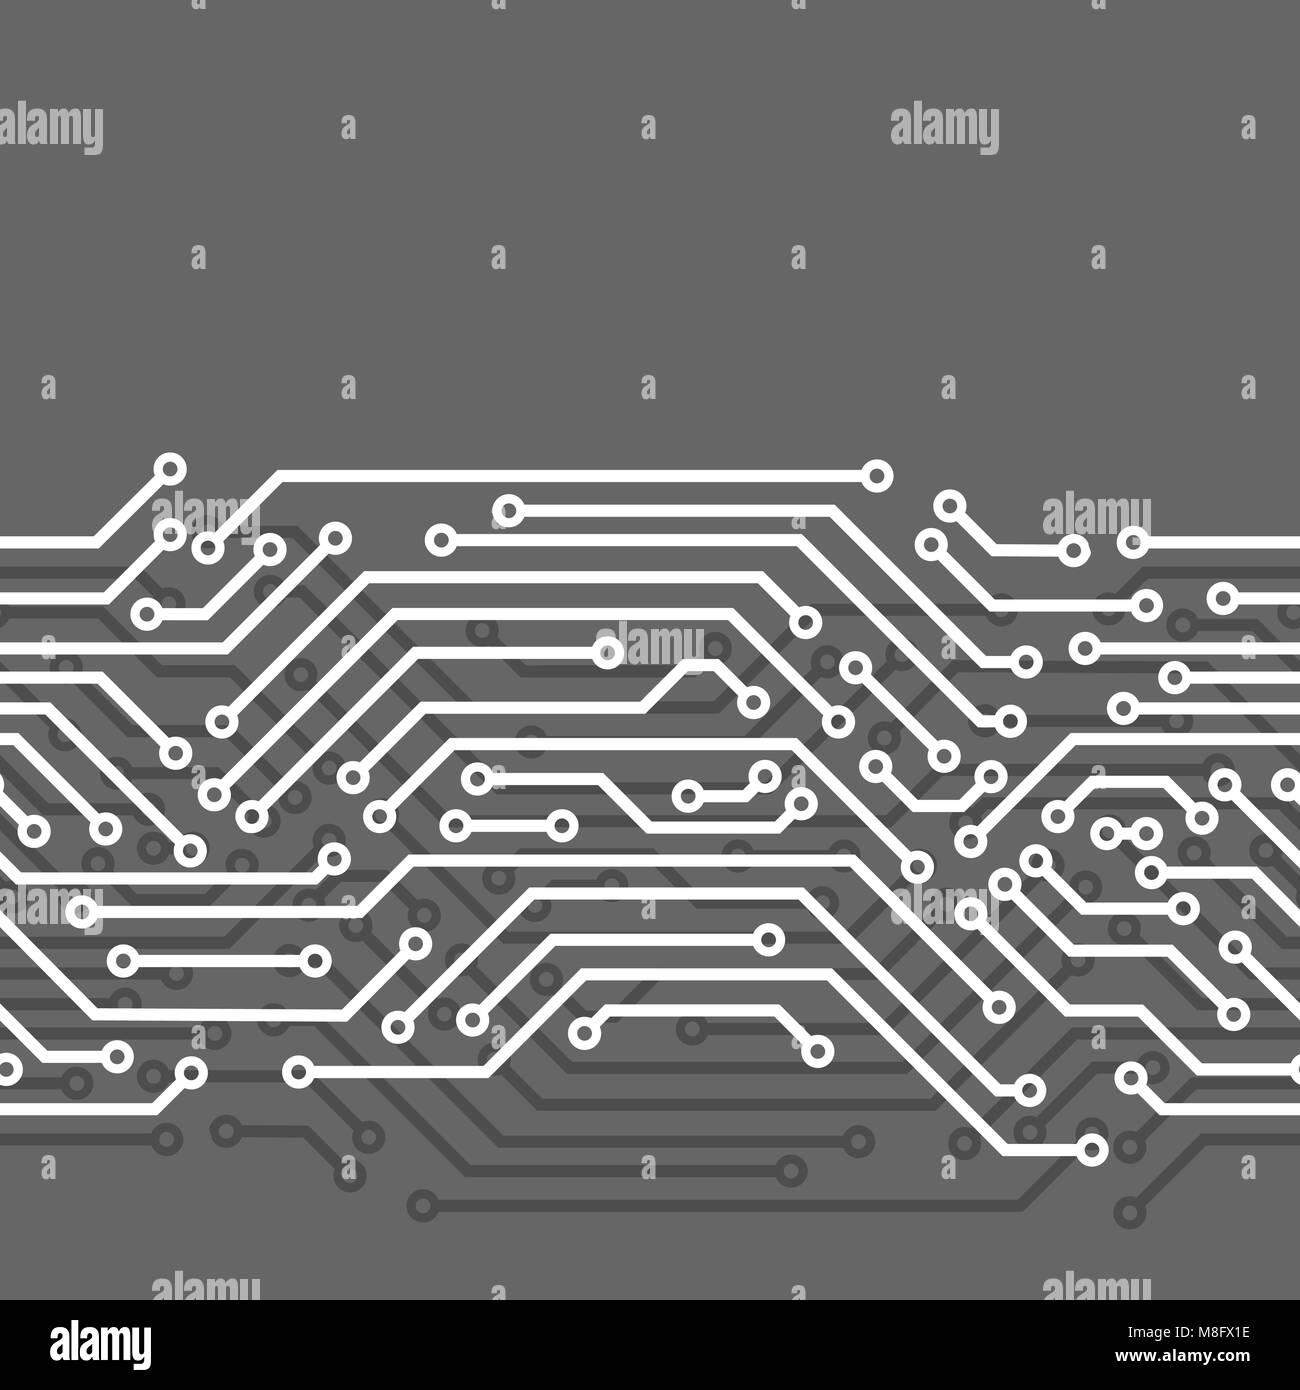 Circuit board seamless pattern. Background of microchip elements Stock Vector